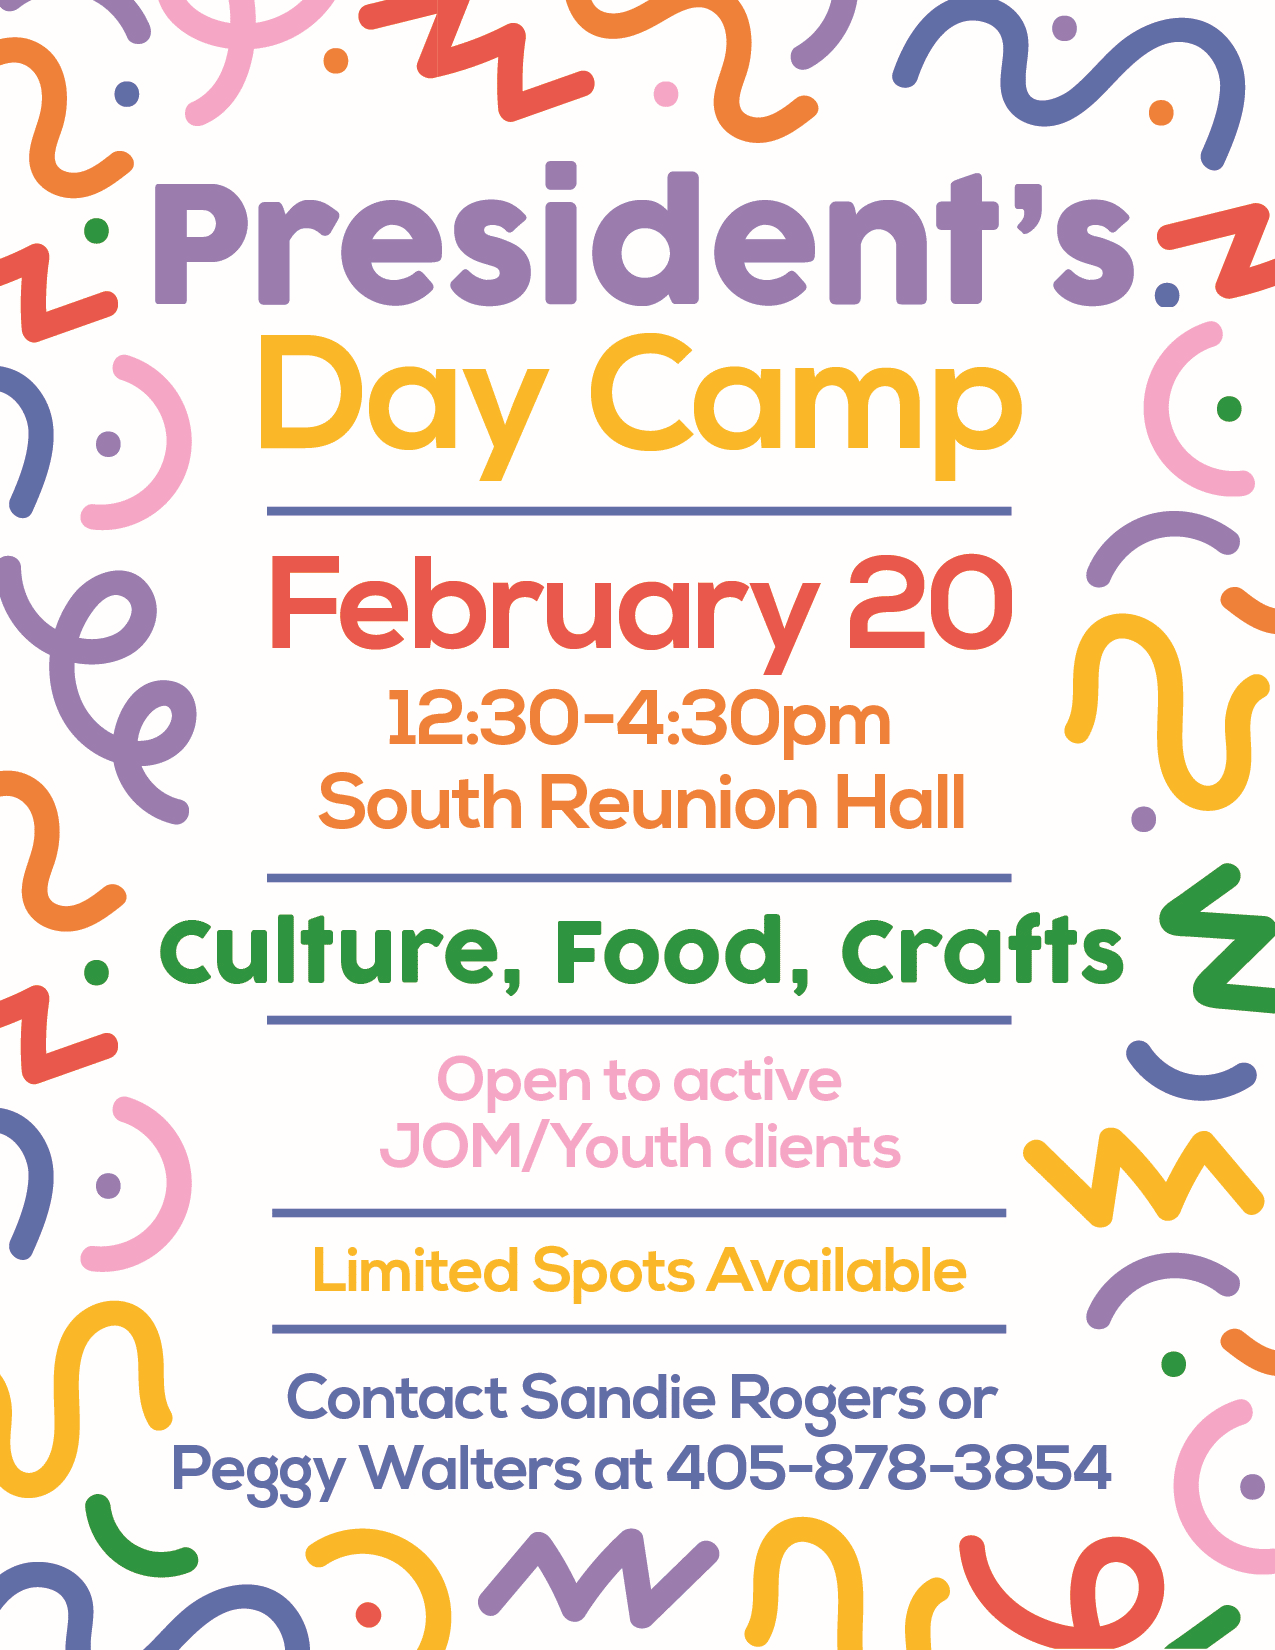 Flyer with multi-colored zigzags, curves, and squiggly lines advertises the President's Day Camp for JOM/Youth clients at CPN South Reunion Hall on February 20, 2023, from 12:30-4:30pm. Call 405-878-3854 to register.